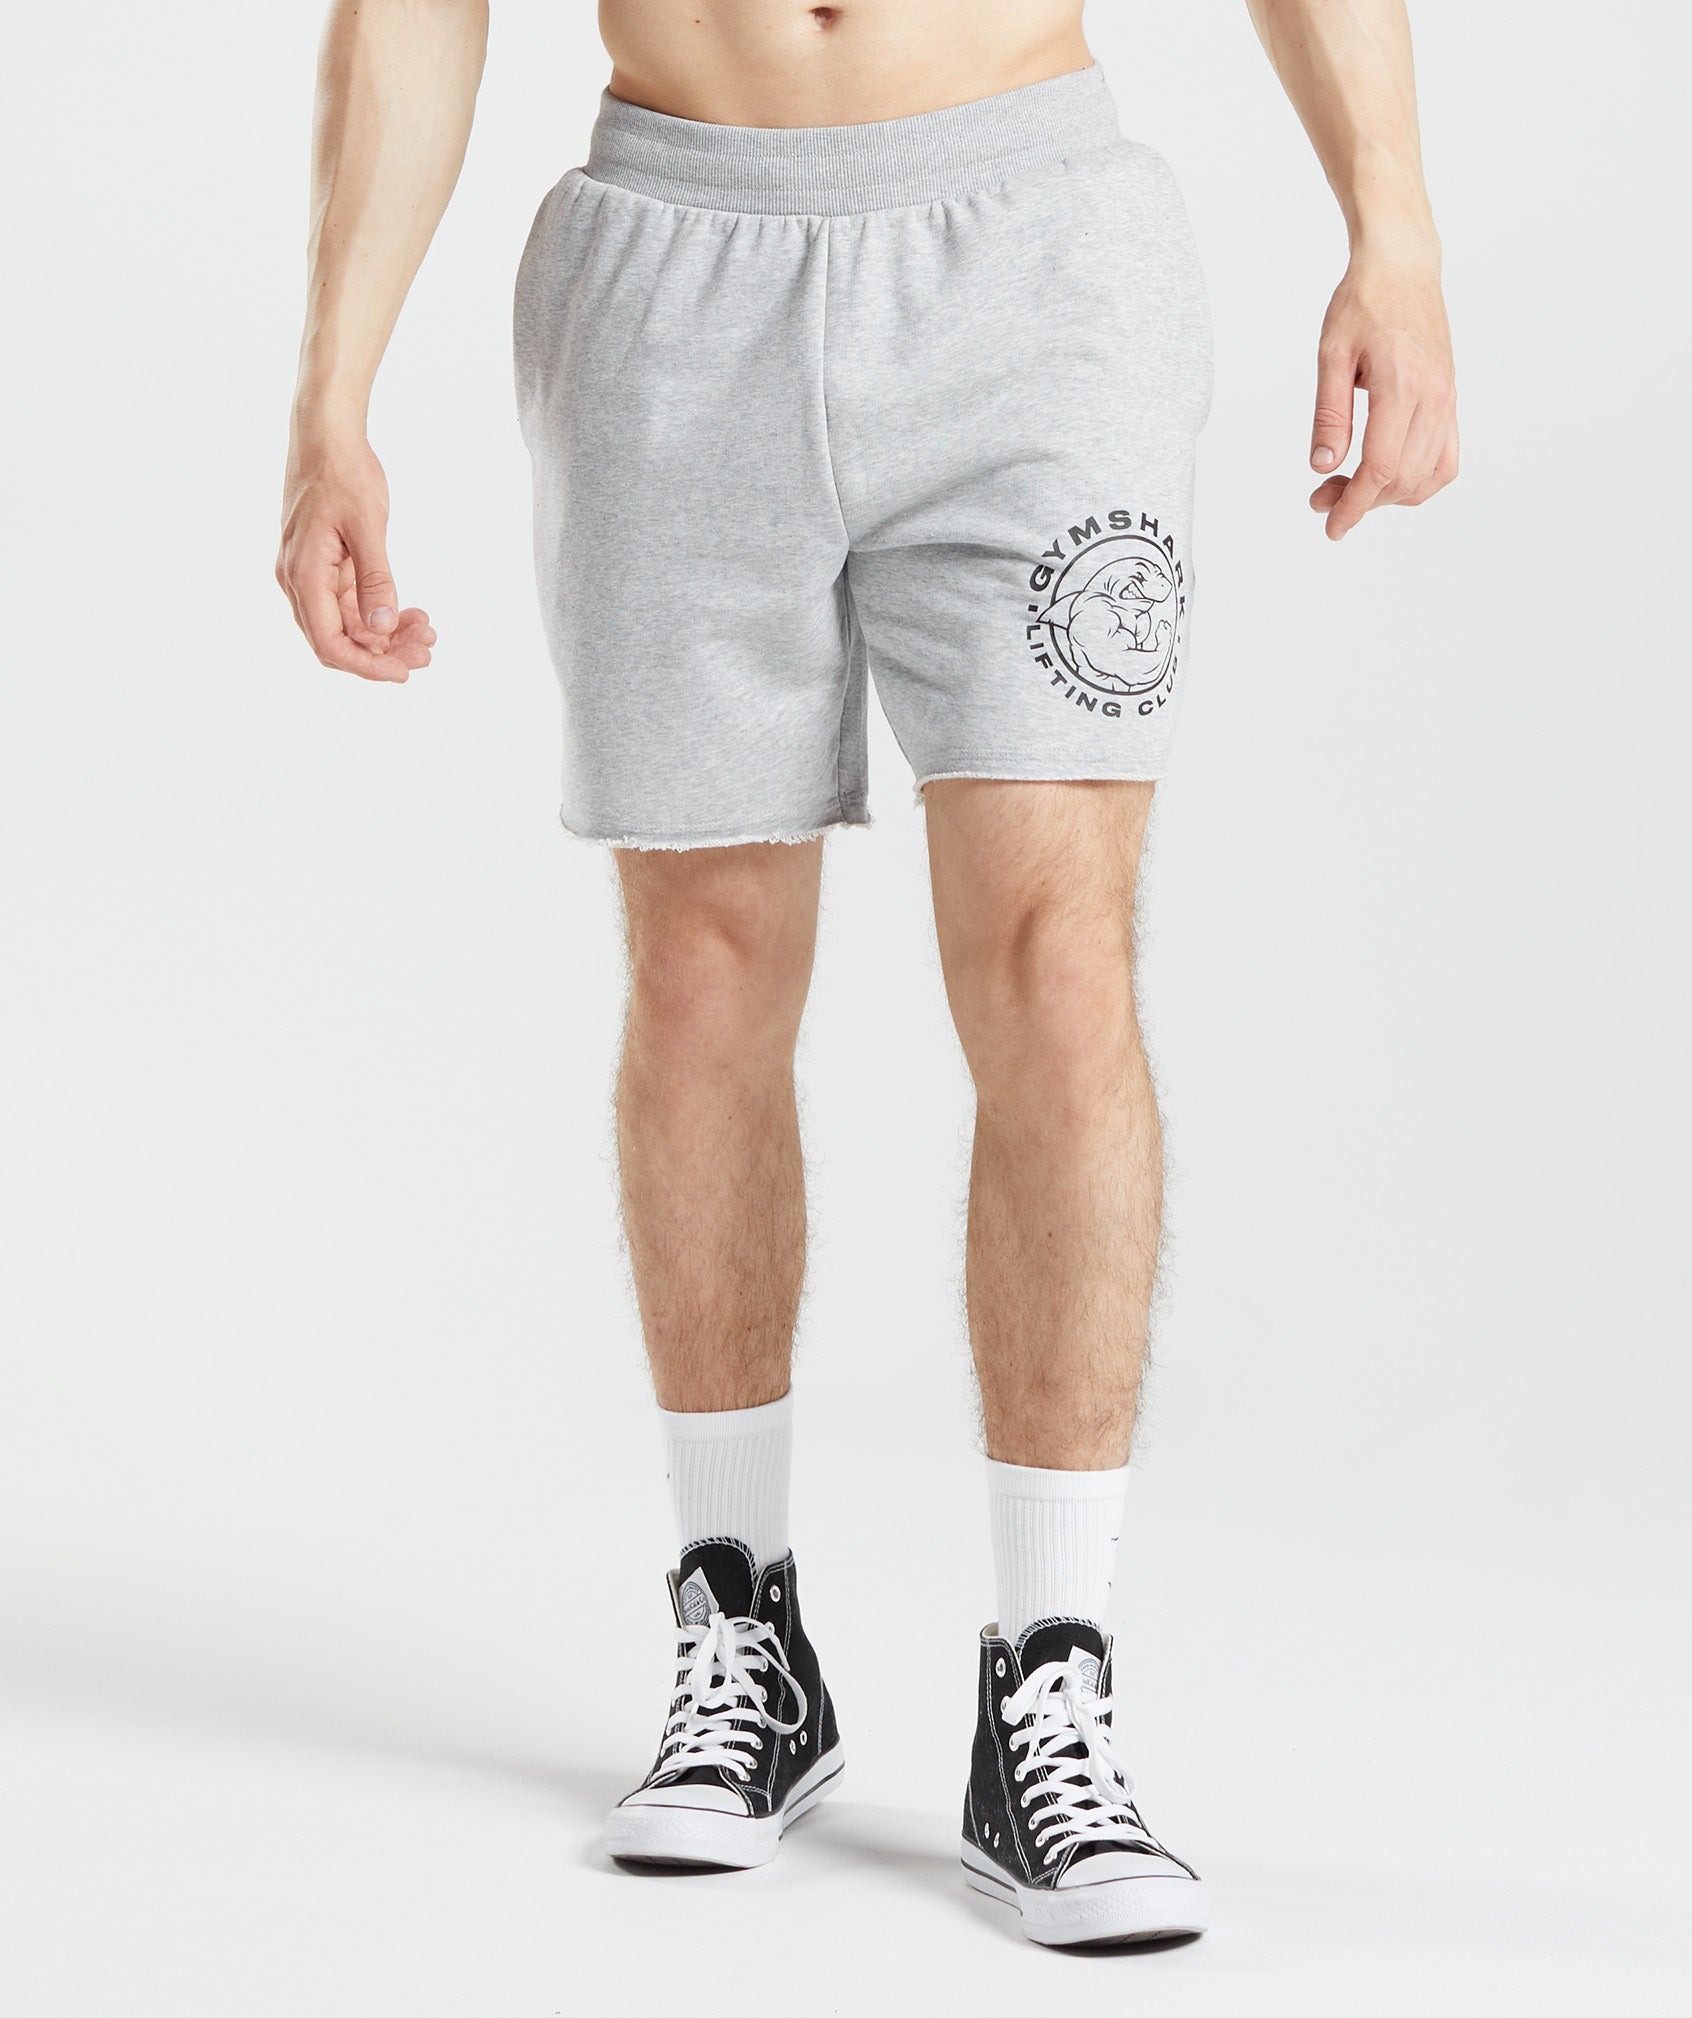 Legacy Shorts in Light Grey Core Marl - view 1